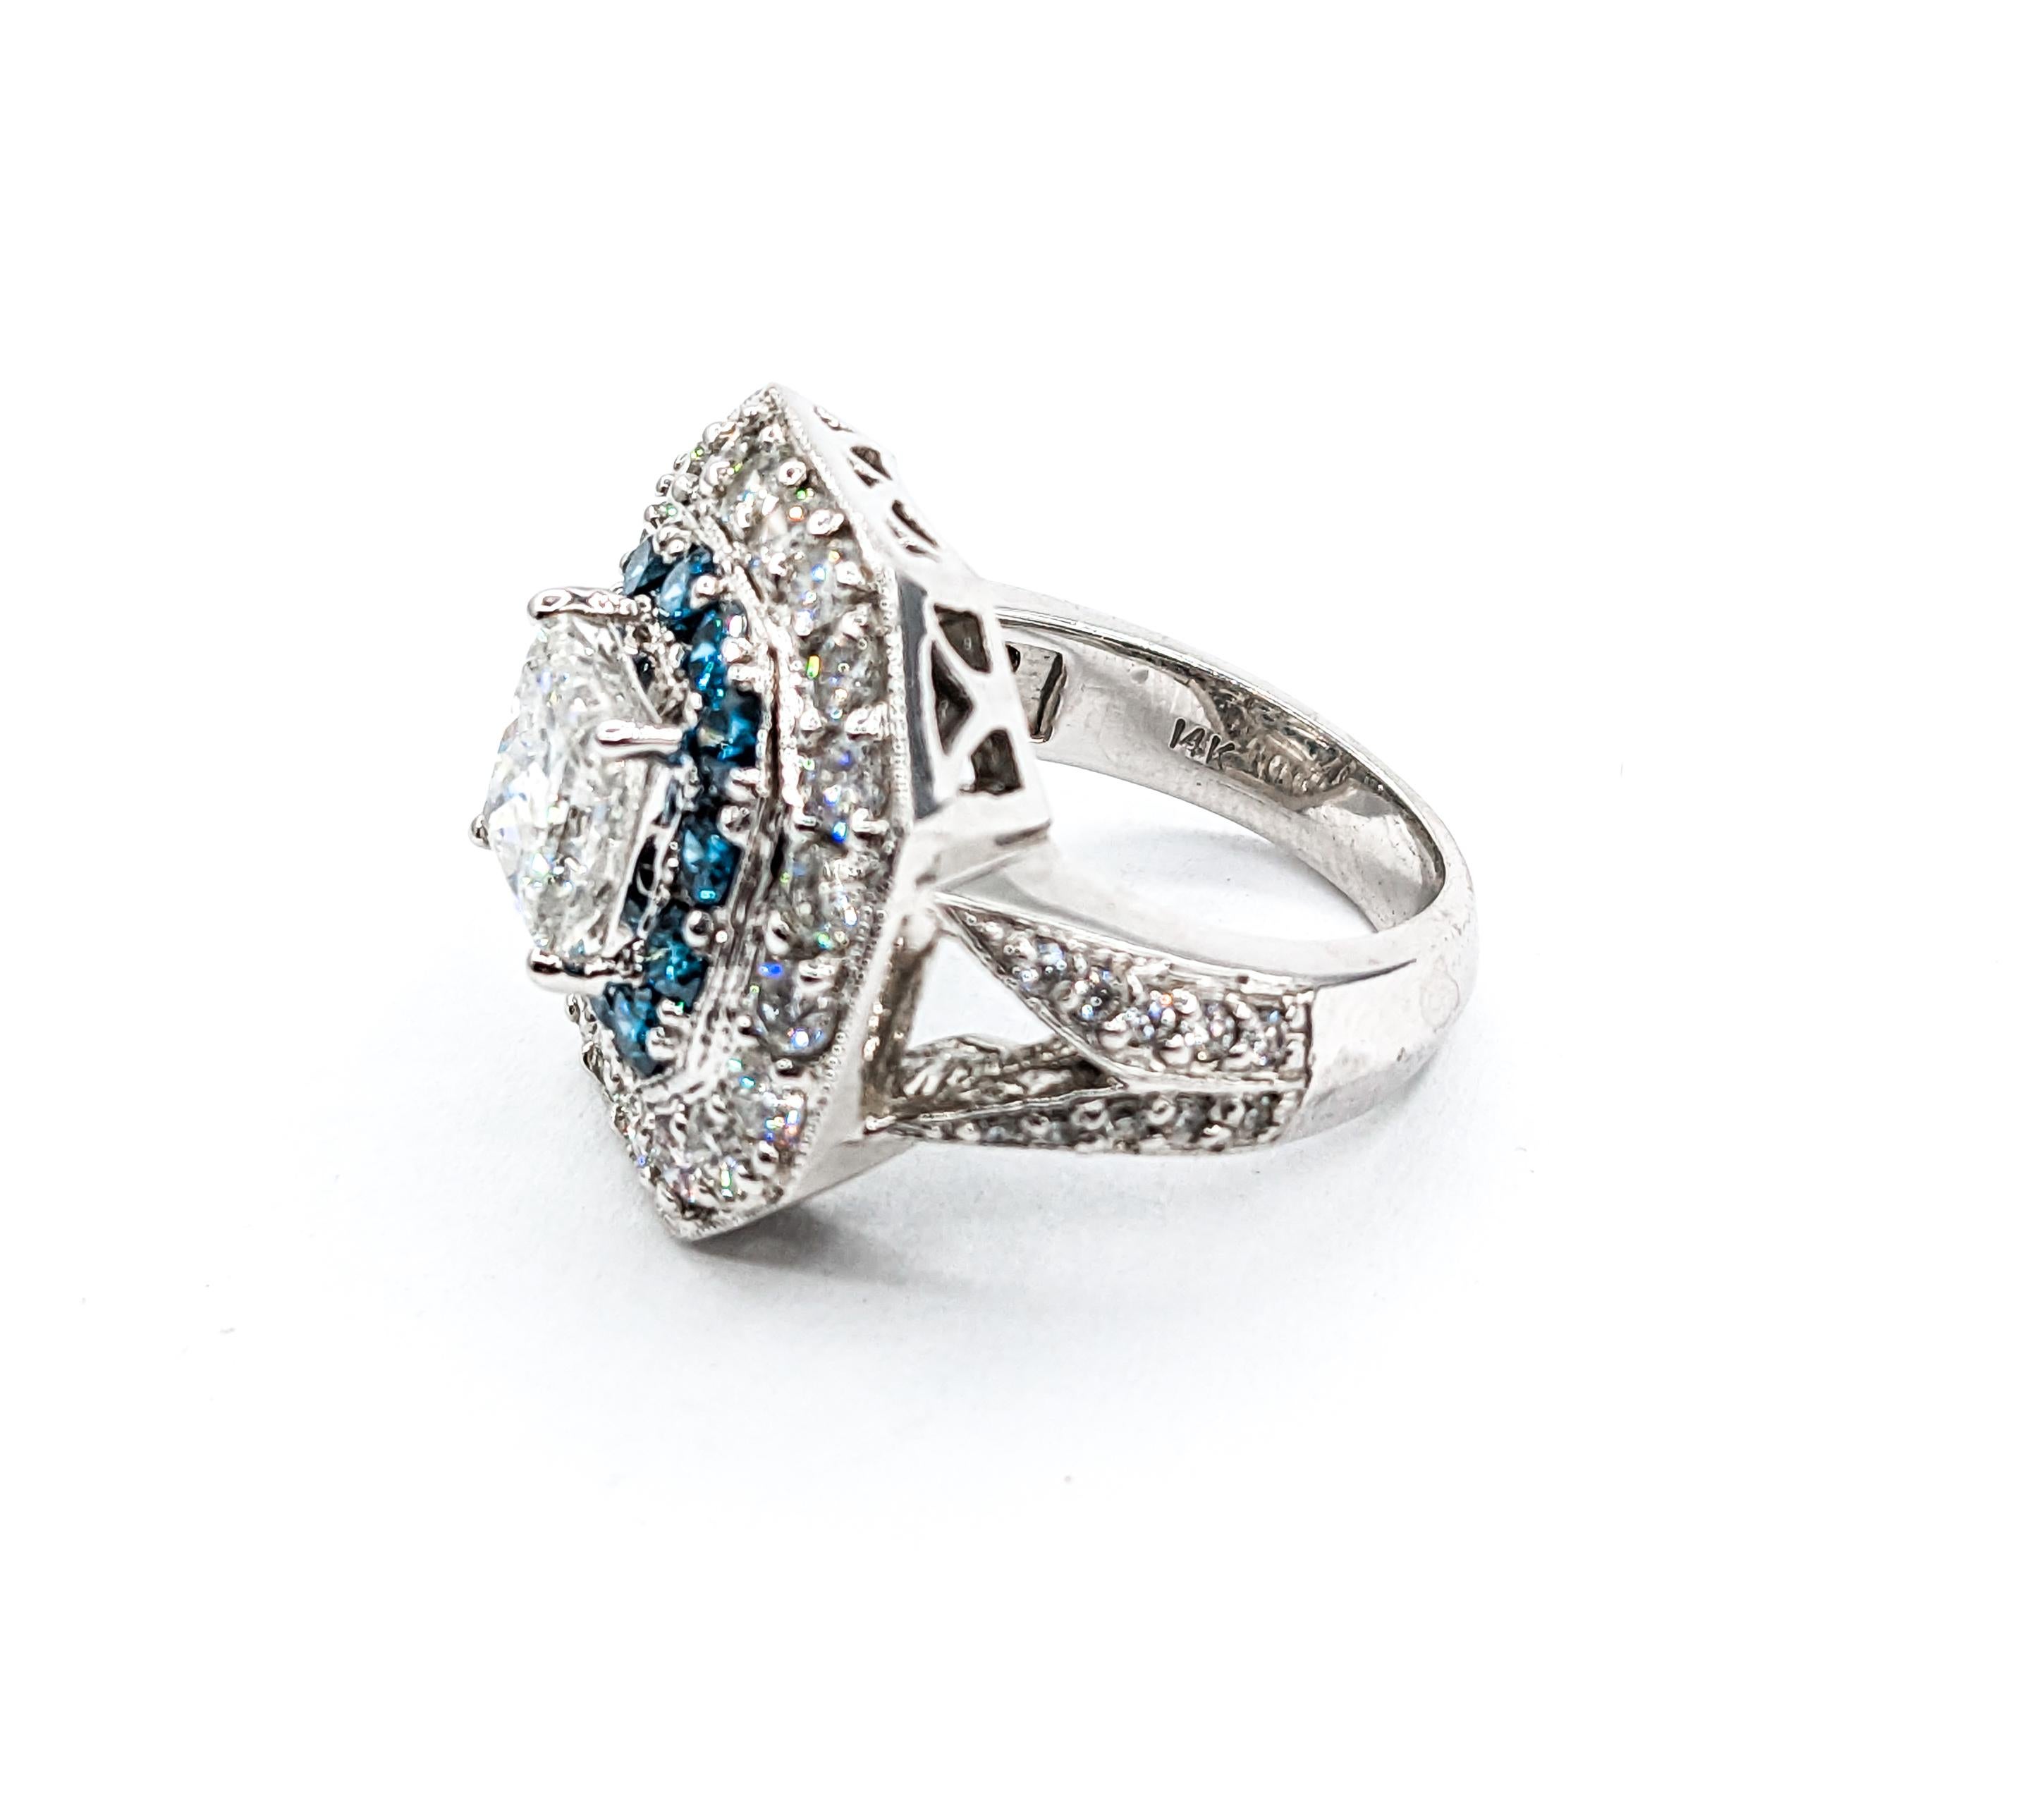 Superb White and Blue Diamond Statement Ring For Sale 2